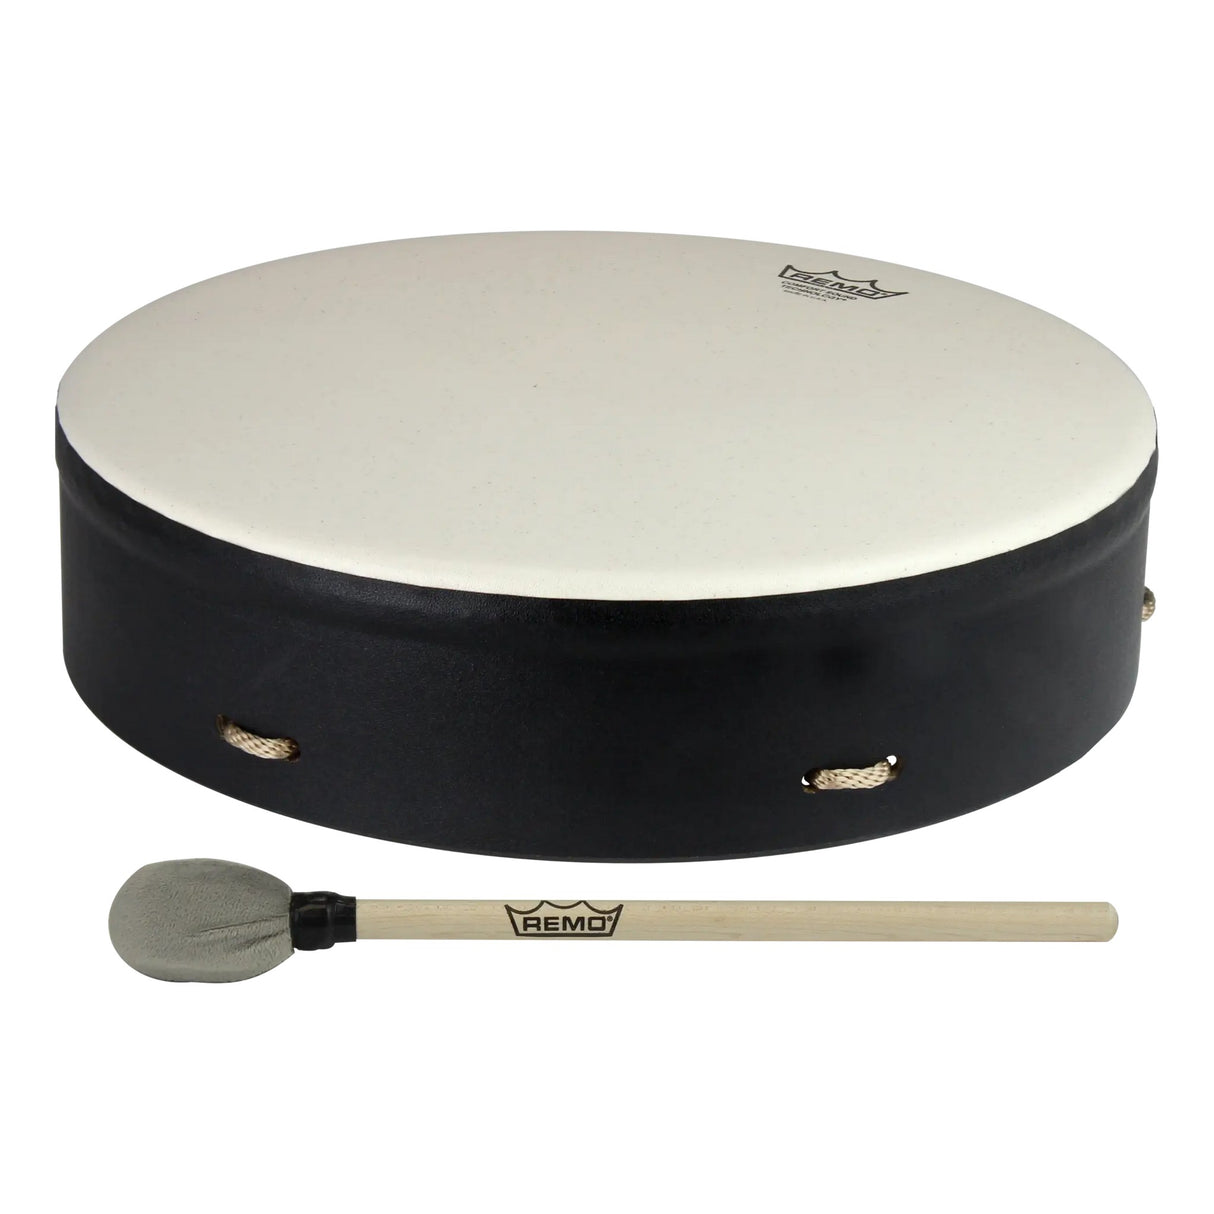 Remo E1-0314-71-CST Buffalo Drum with Comfort Sound Technology, 14-Inch